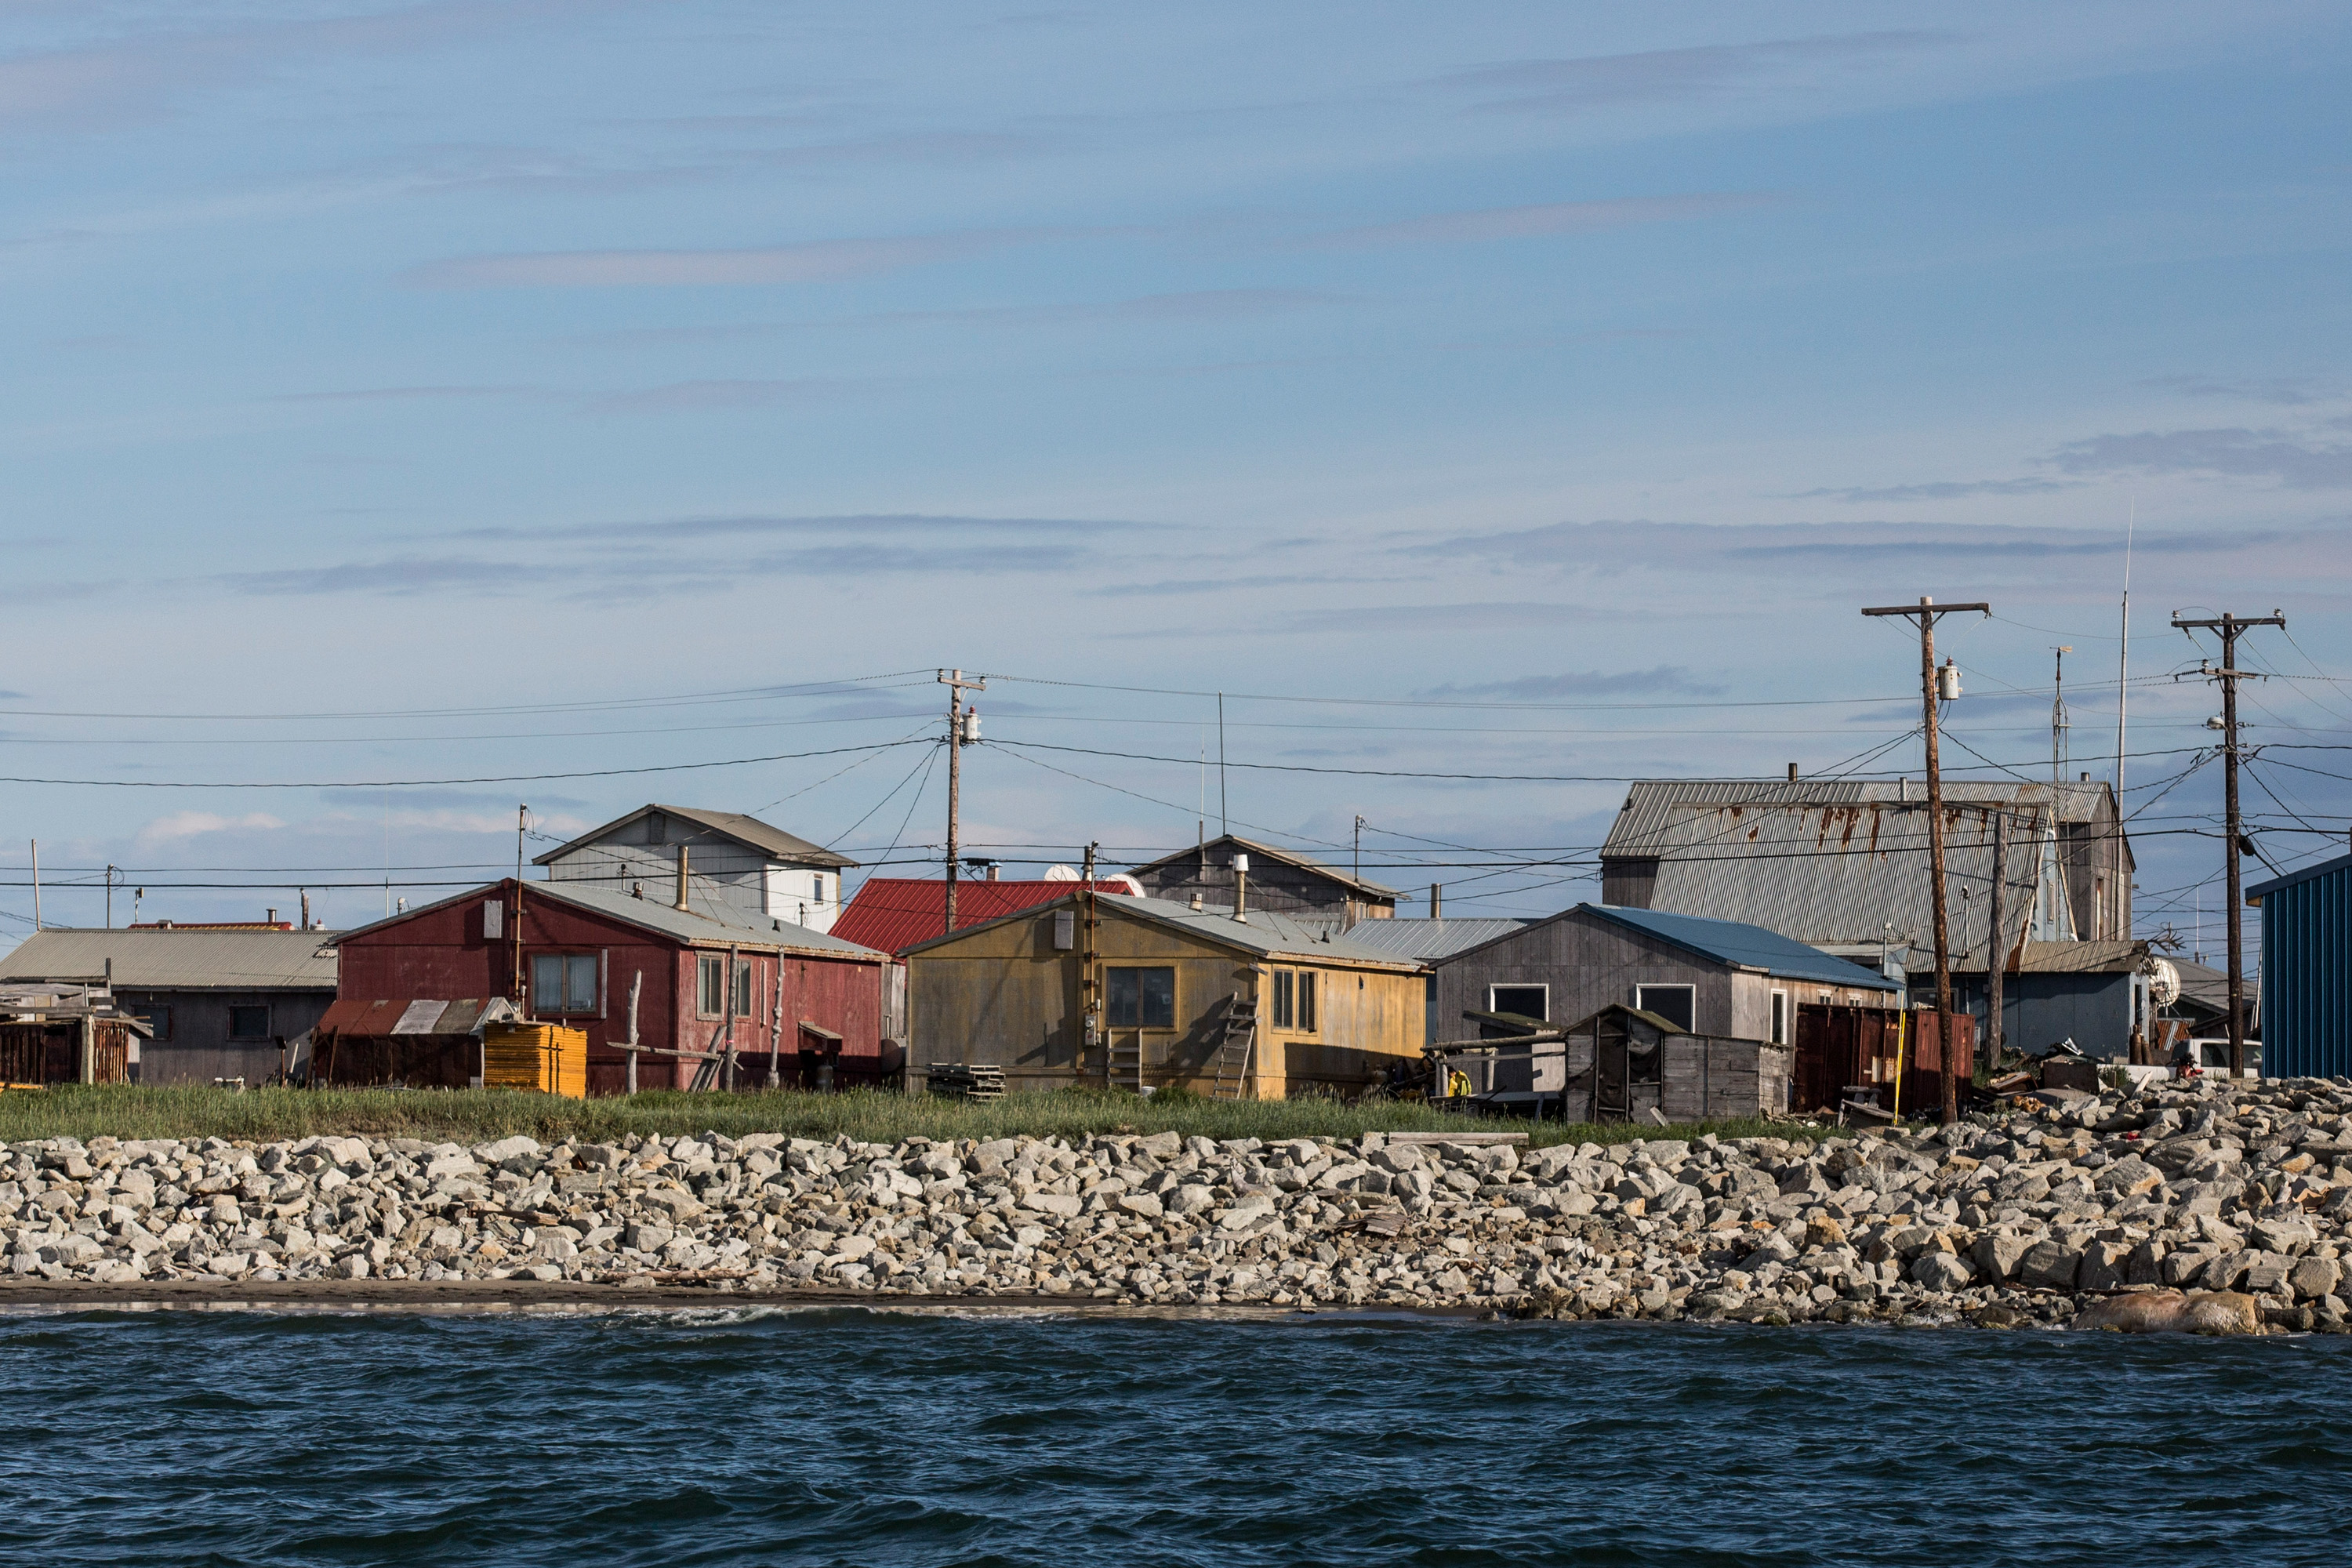 The village of Shishmaref, Alaska, which sits upon the Chukchi sea, is seen on July 9, 2015. (Andrew Burton—Getty Images)